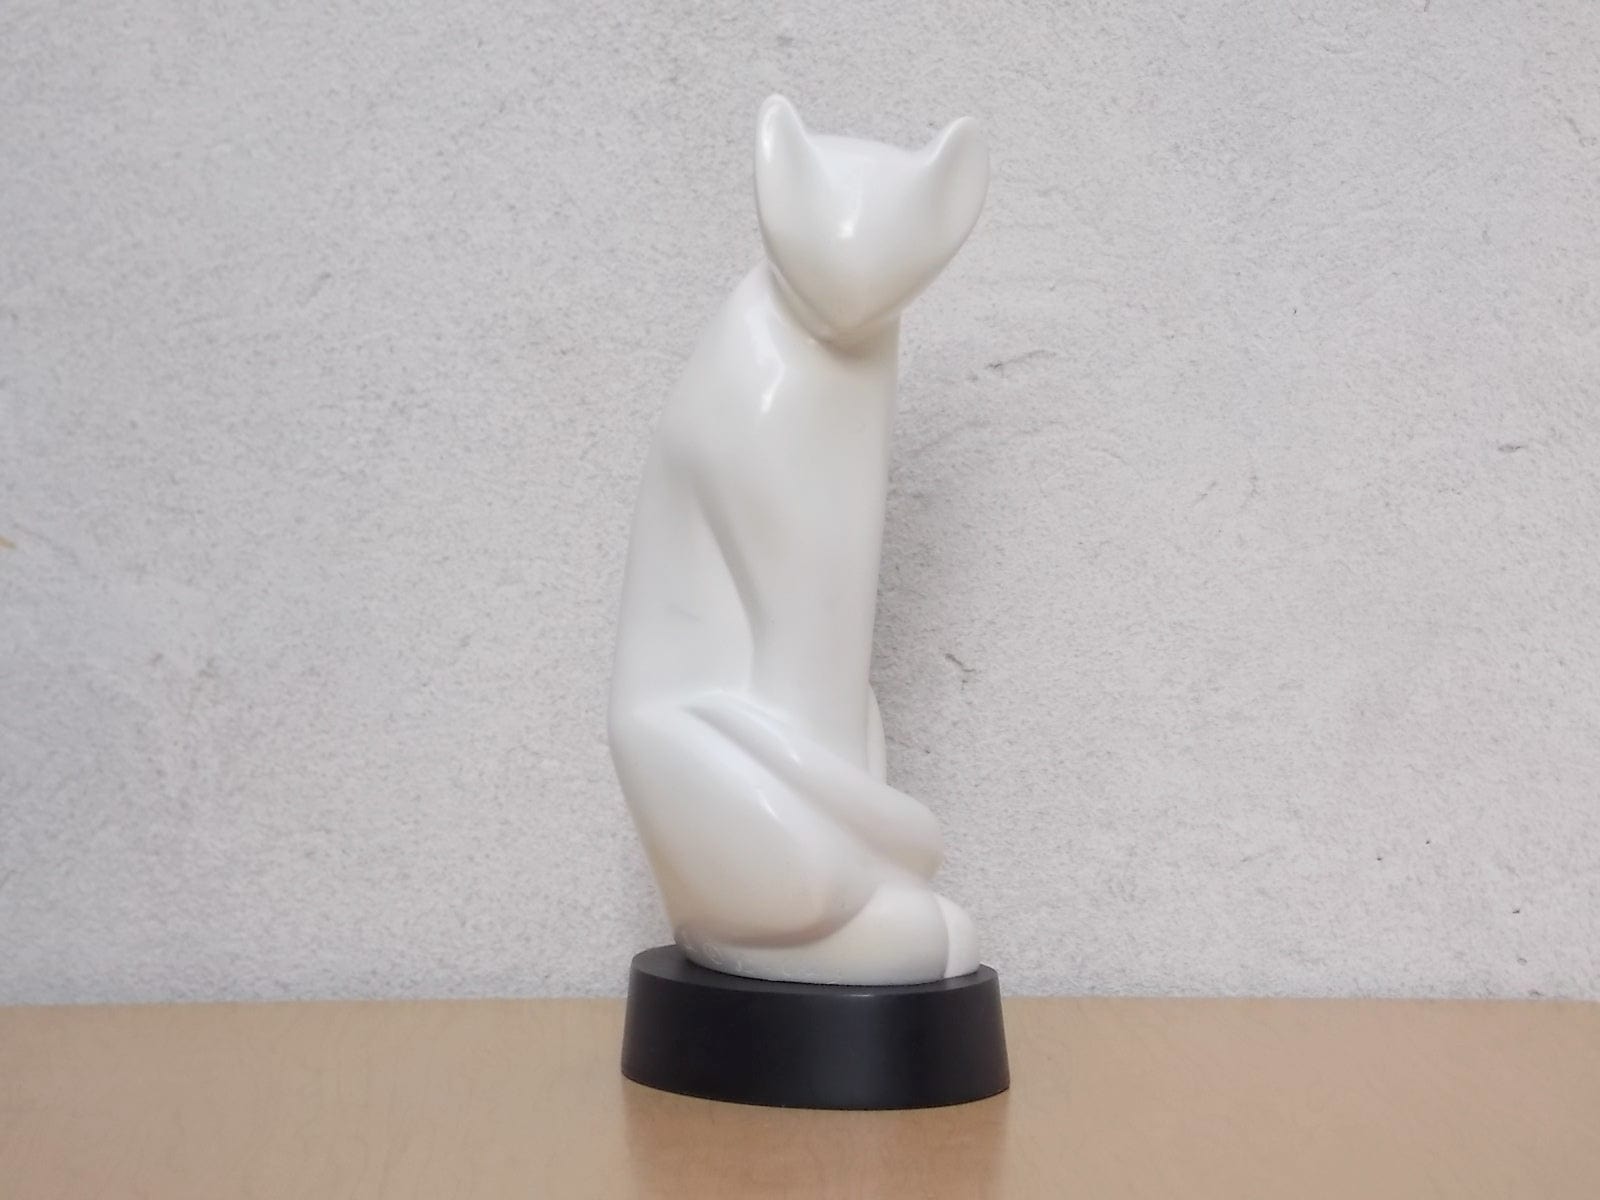 I Like Mike's Mid Century Modern Wall Decor & Art White Stone Modern Cat Table Sculpture by Li Ching